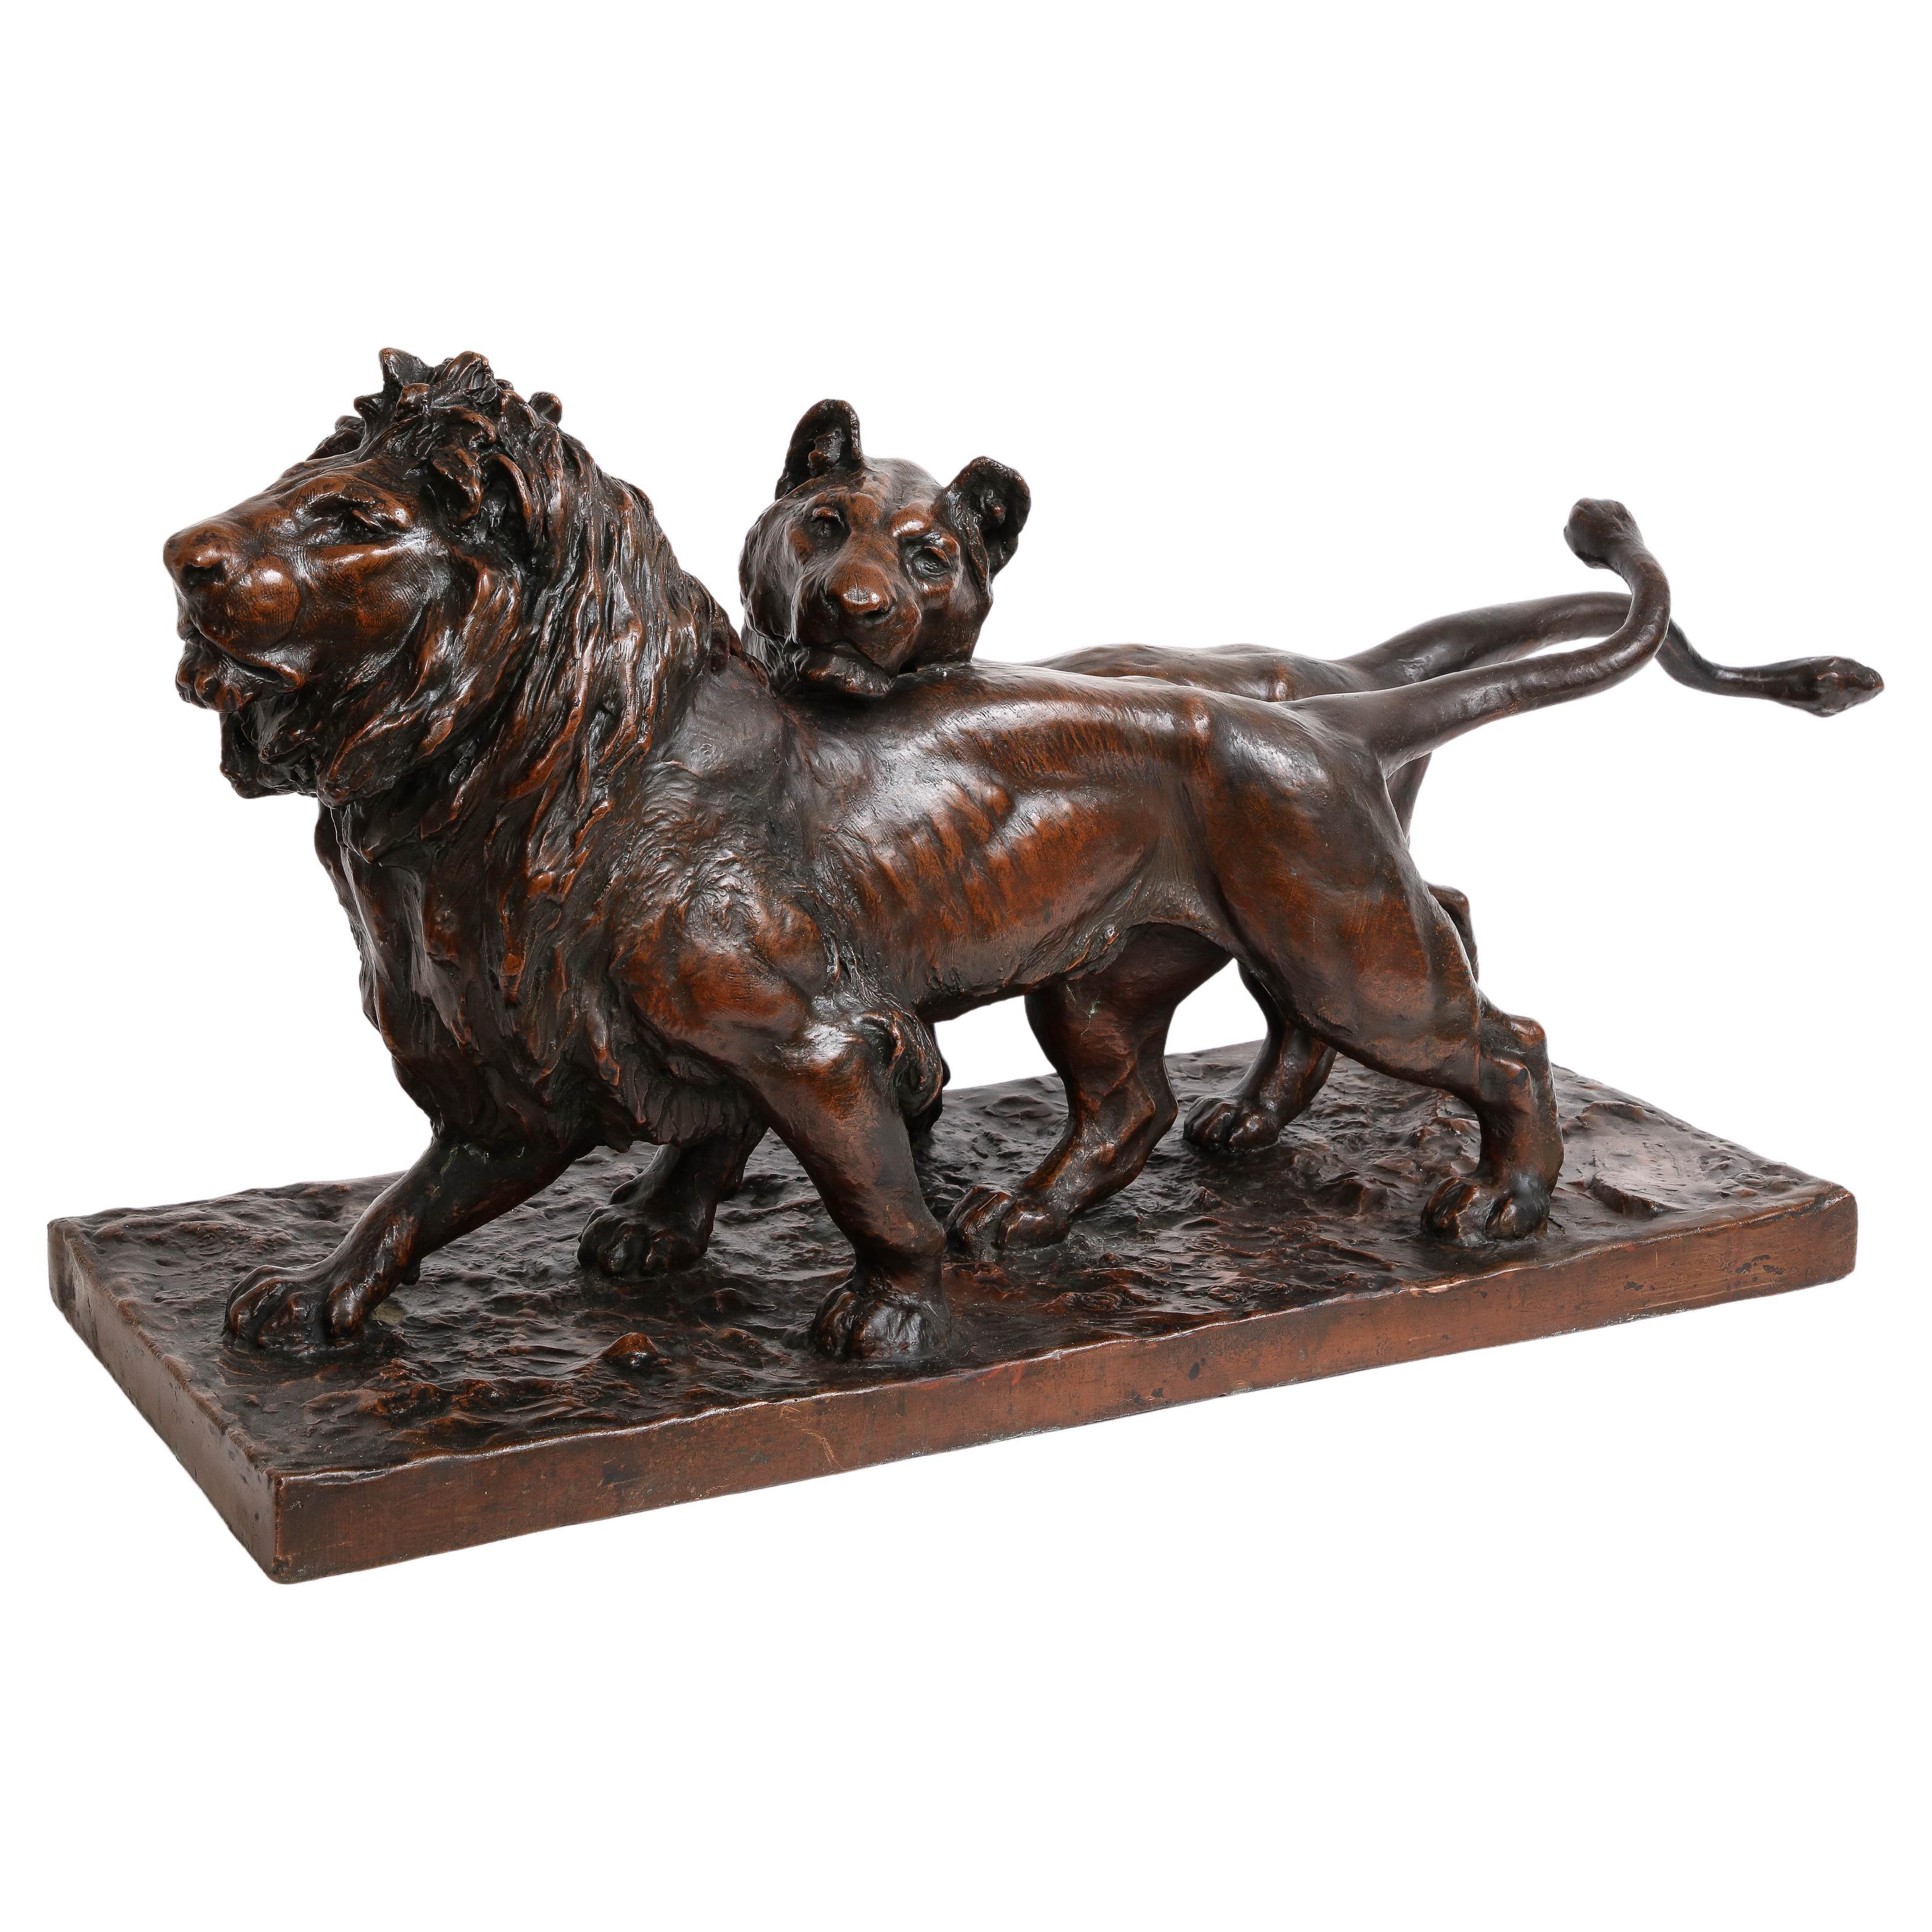 A Patinated Bronze Sculpture of Two Striding Lions, Signed By the Artist